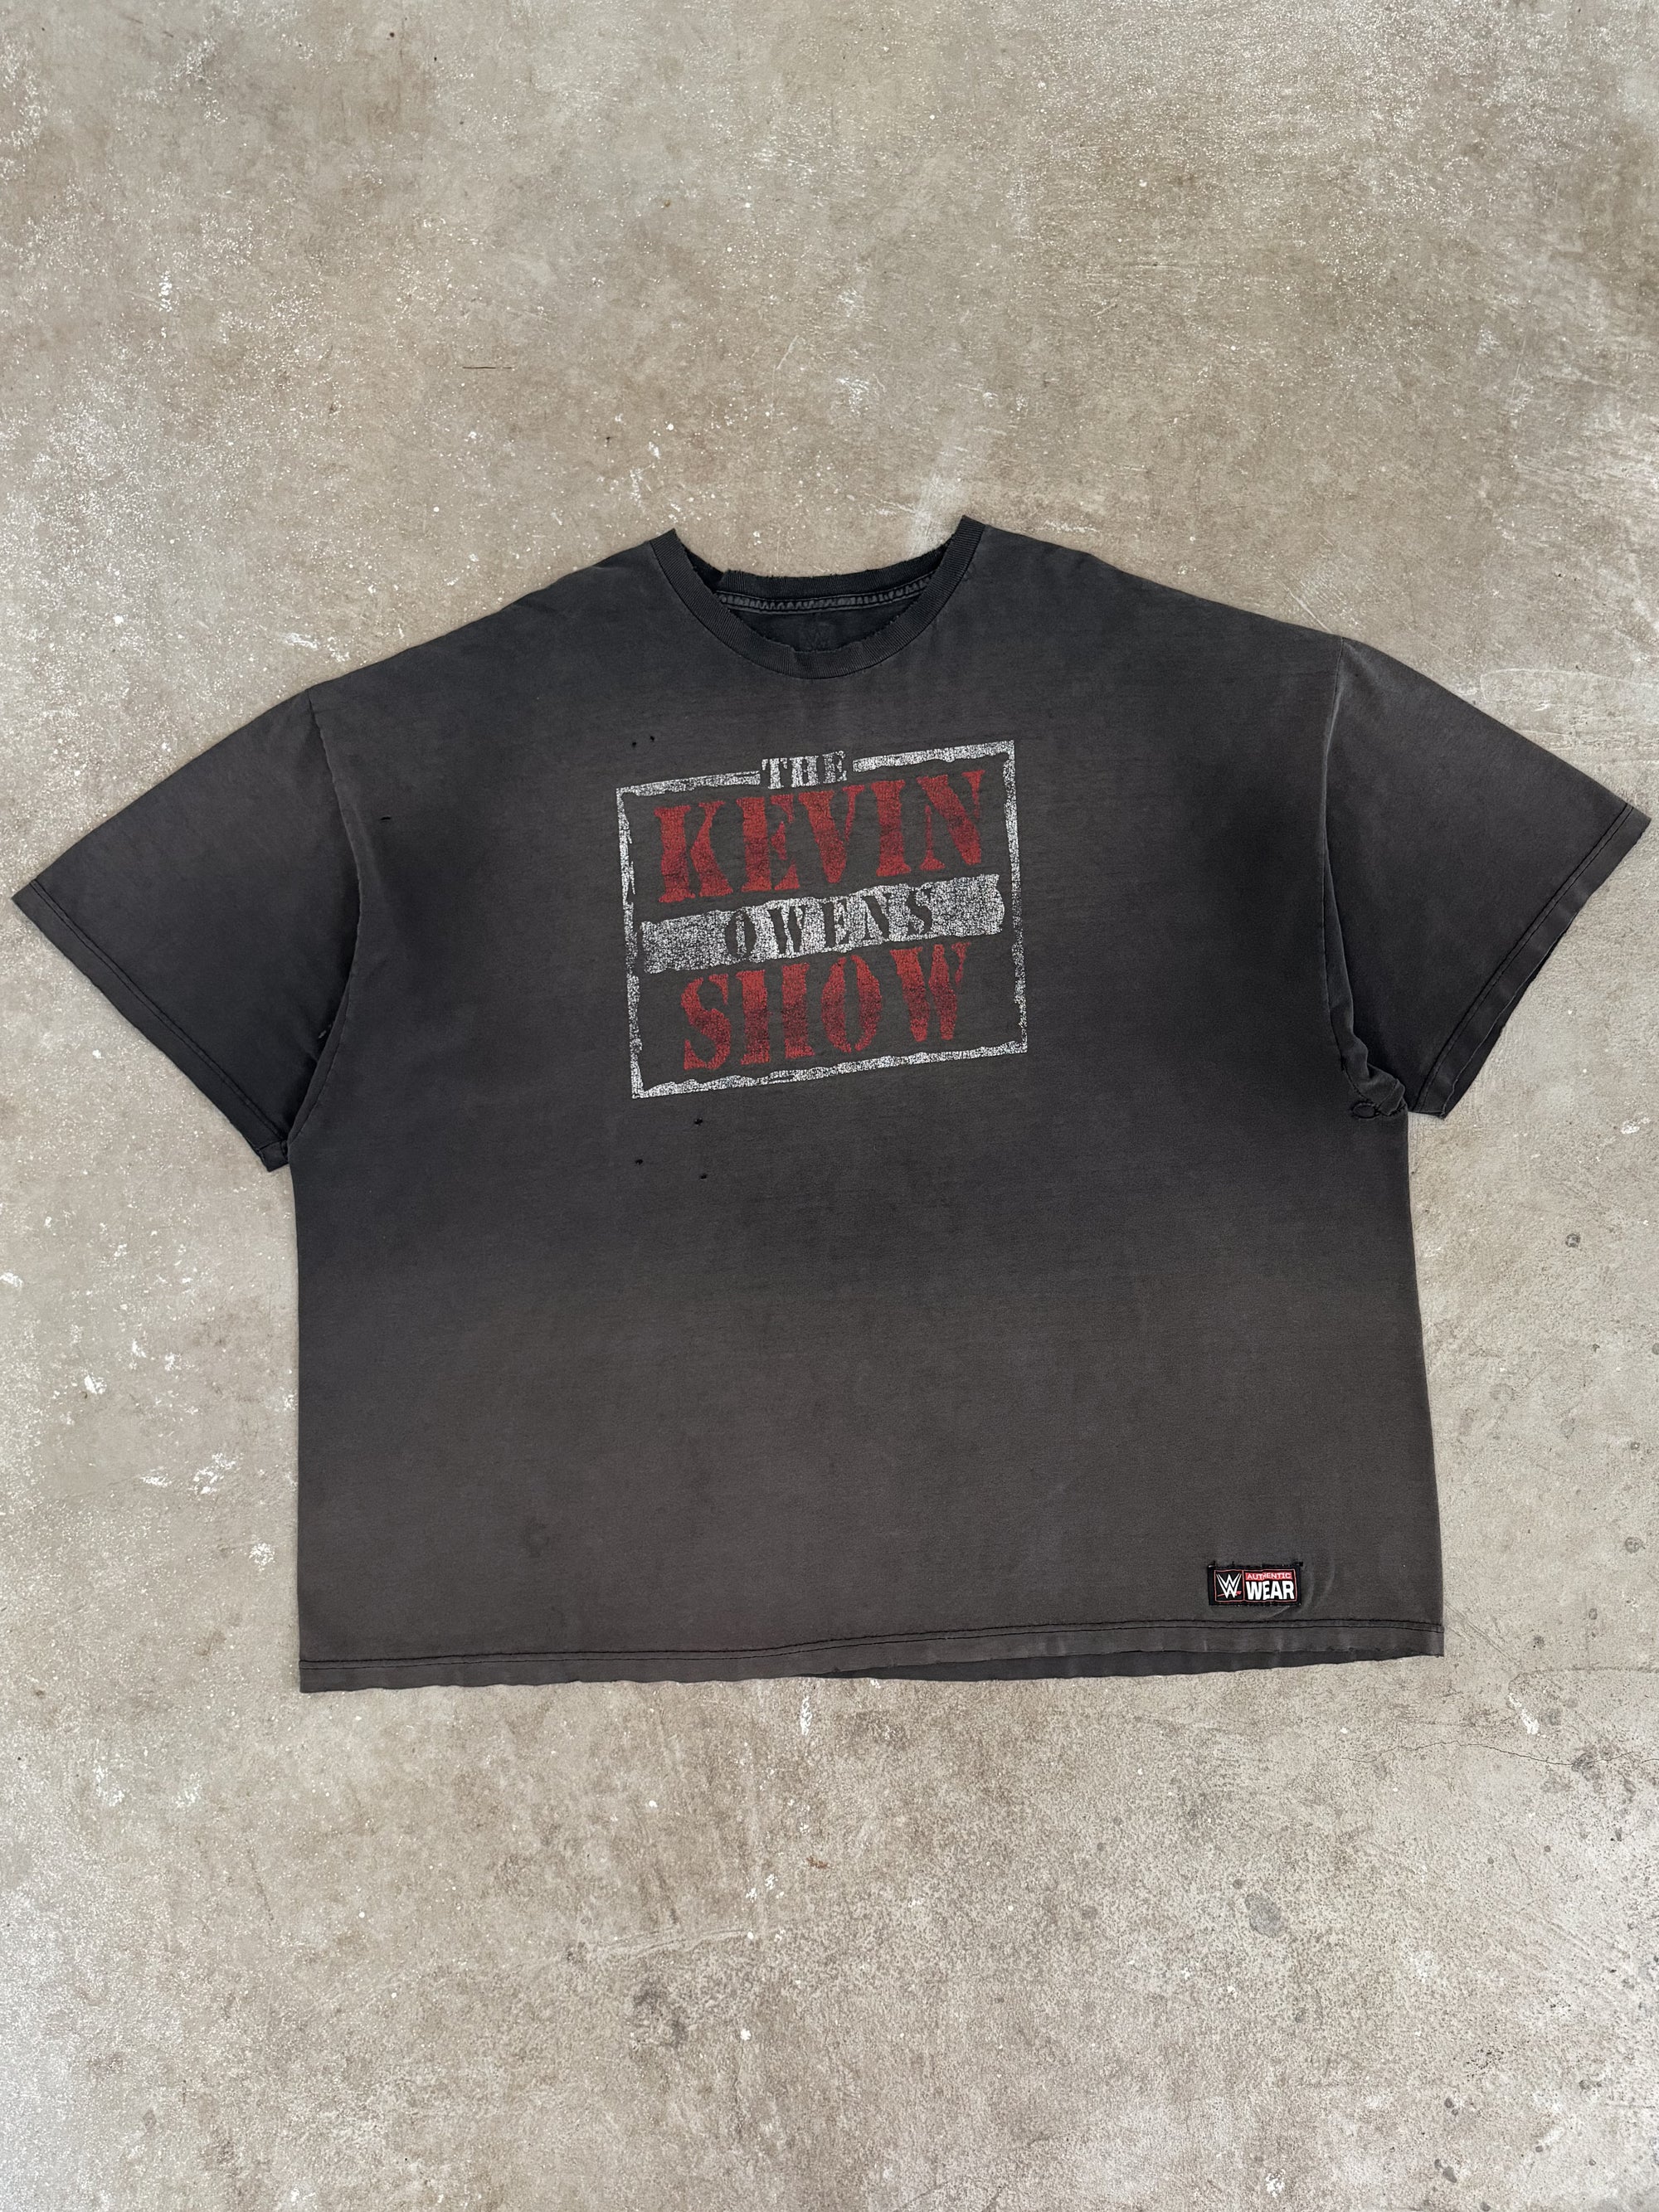 2010s "The Kevin Owens Show" Distressed Faded Tee (5XL)